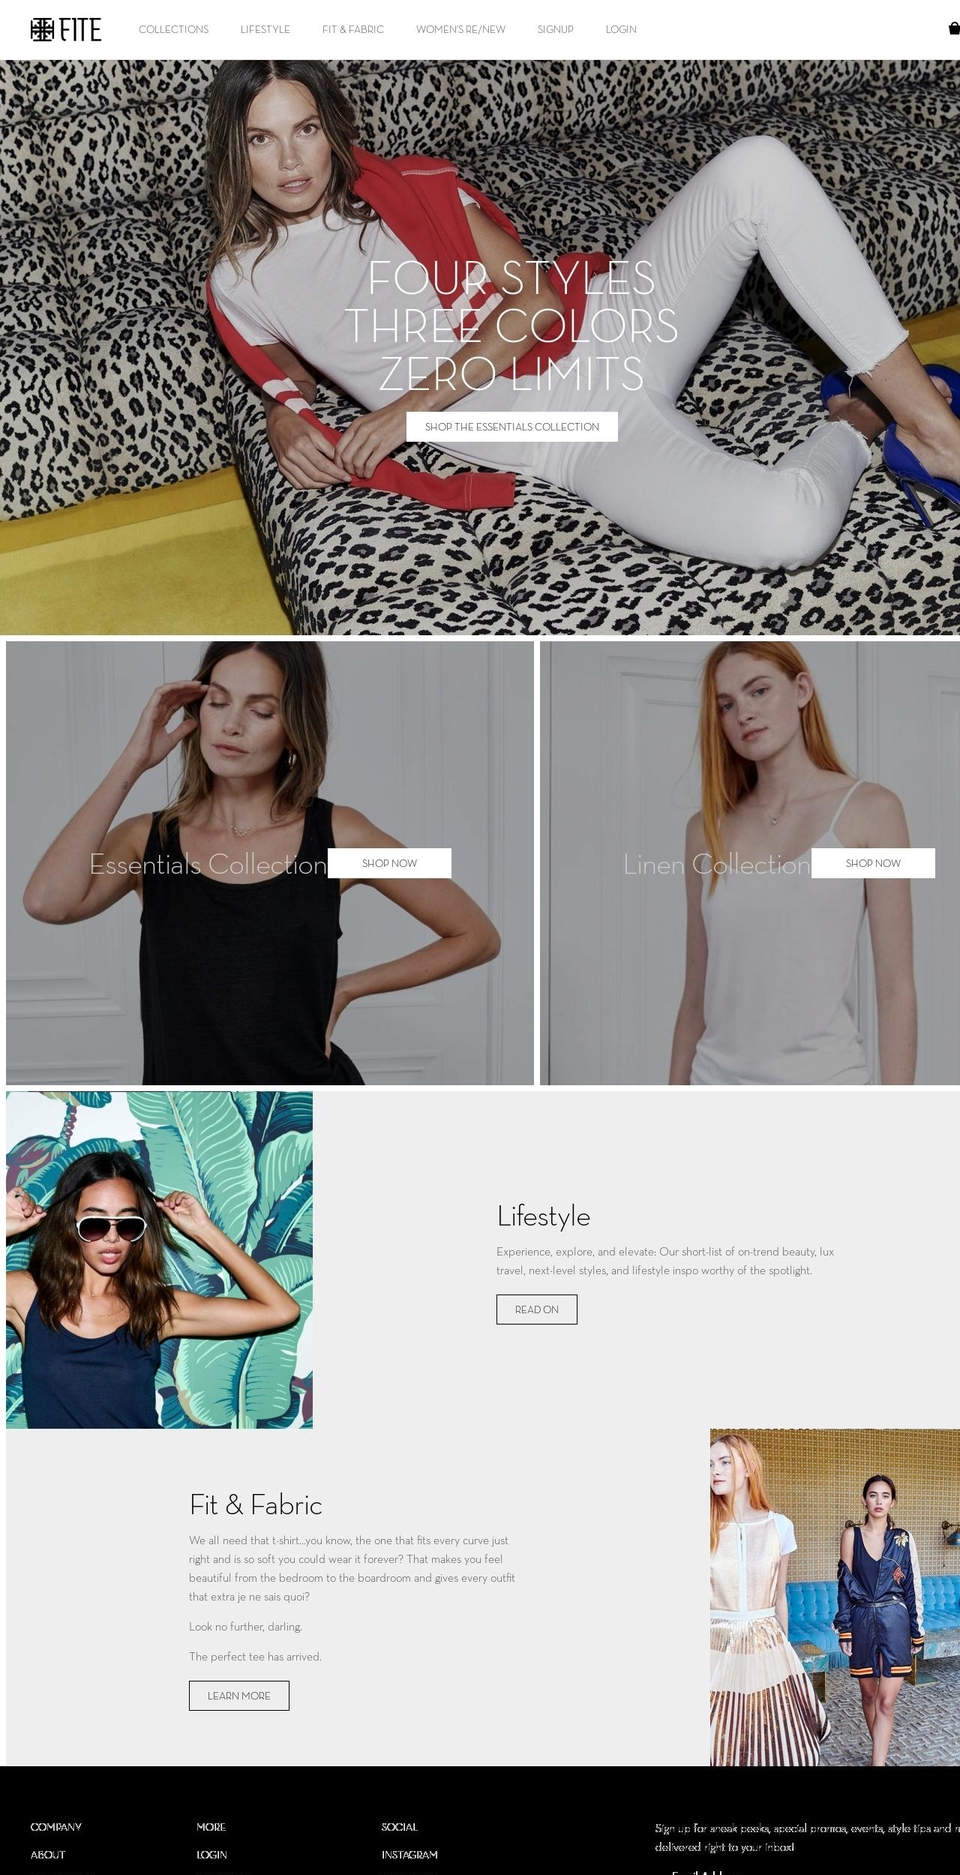 Website 2.0 Shopify theme site example fitelux.com